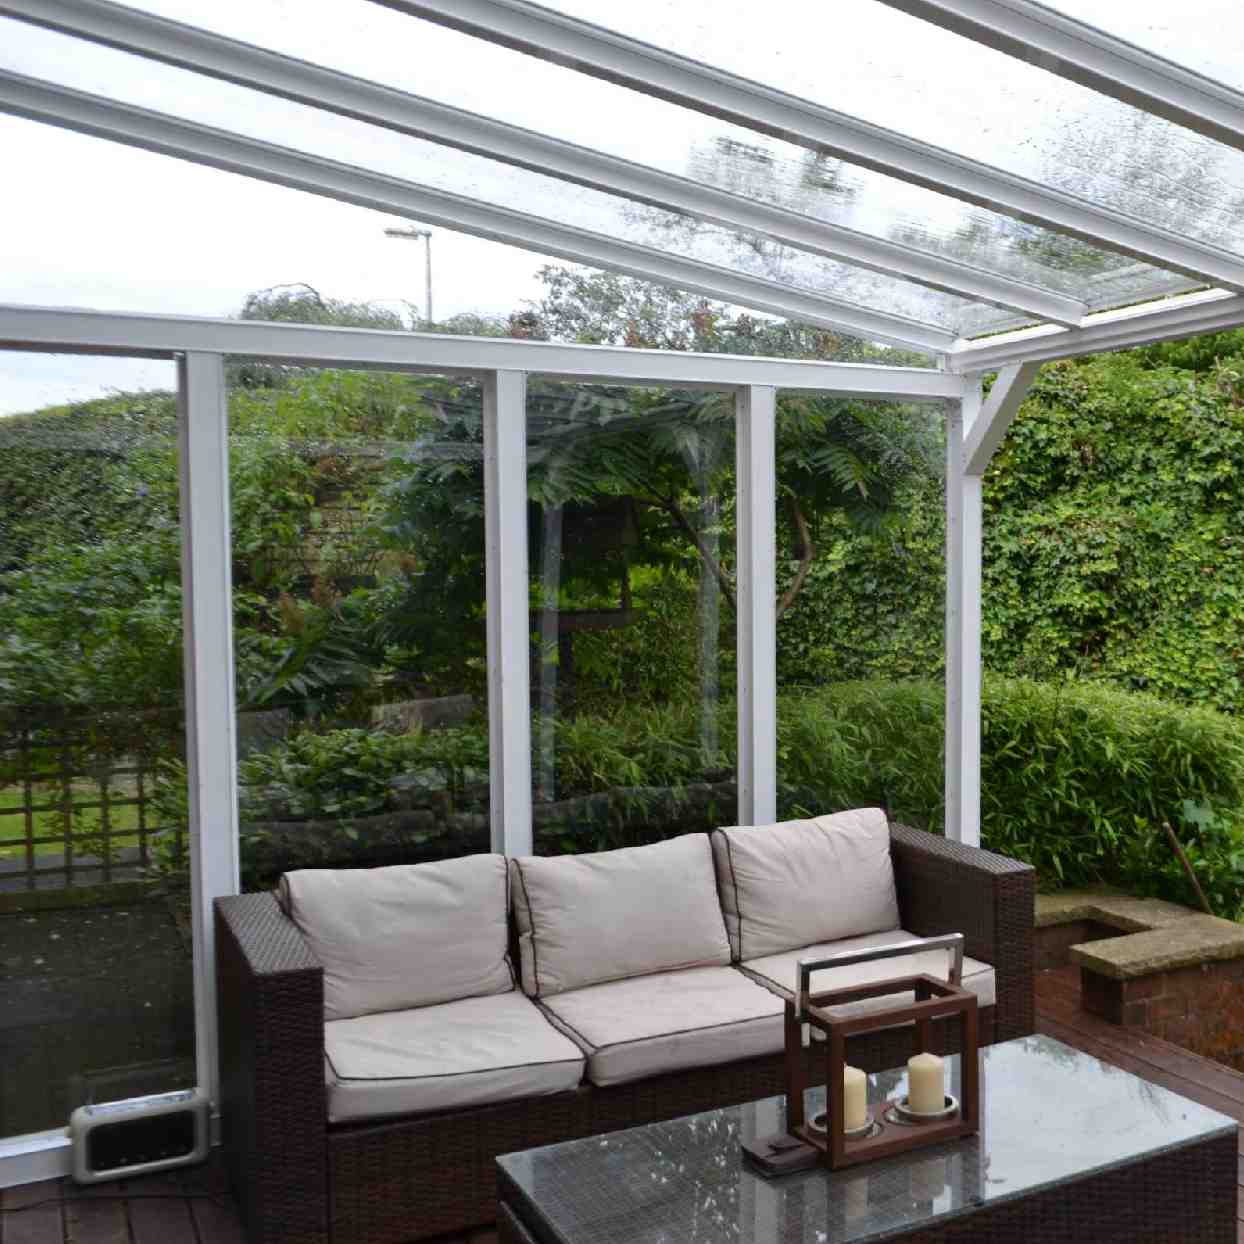 Buy Omega Verandah White with 16mm Polycarbonate Glazing - 7.8m (W) x 3.5m (P), (4) Supporting Posts online today